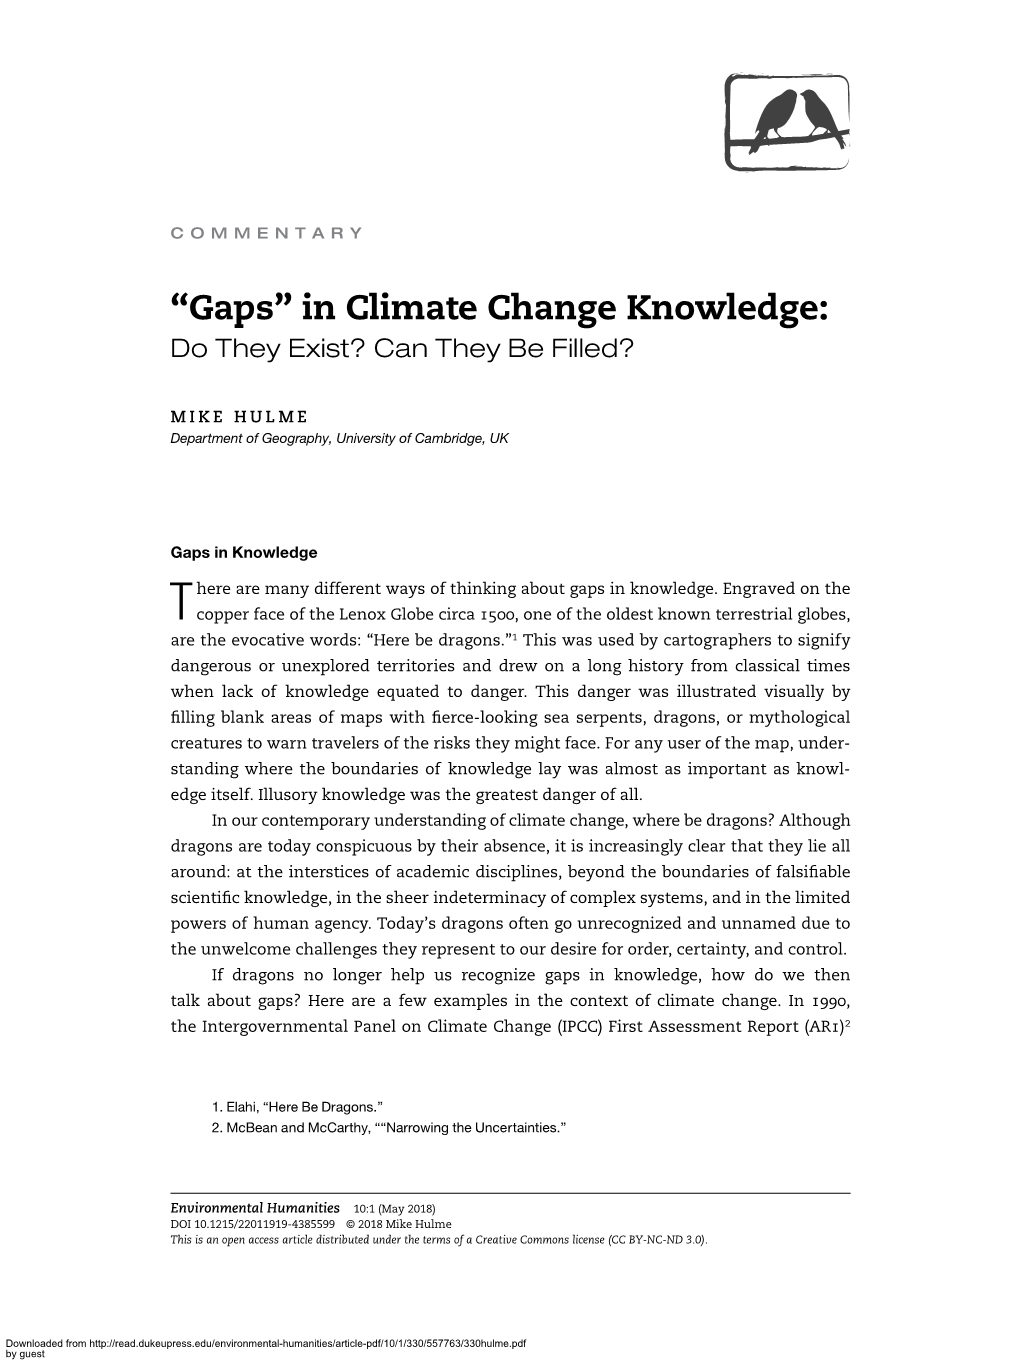 “Gaps” in Climate Change Knowledge: Do They Exist? Can They Be Filled?